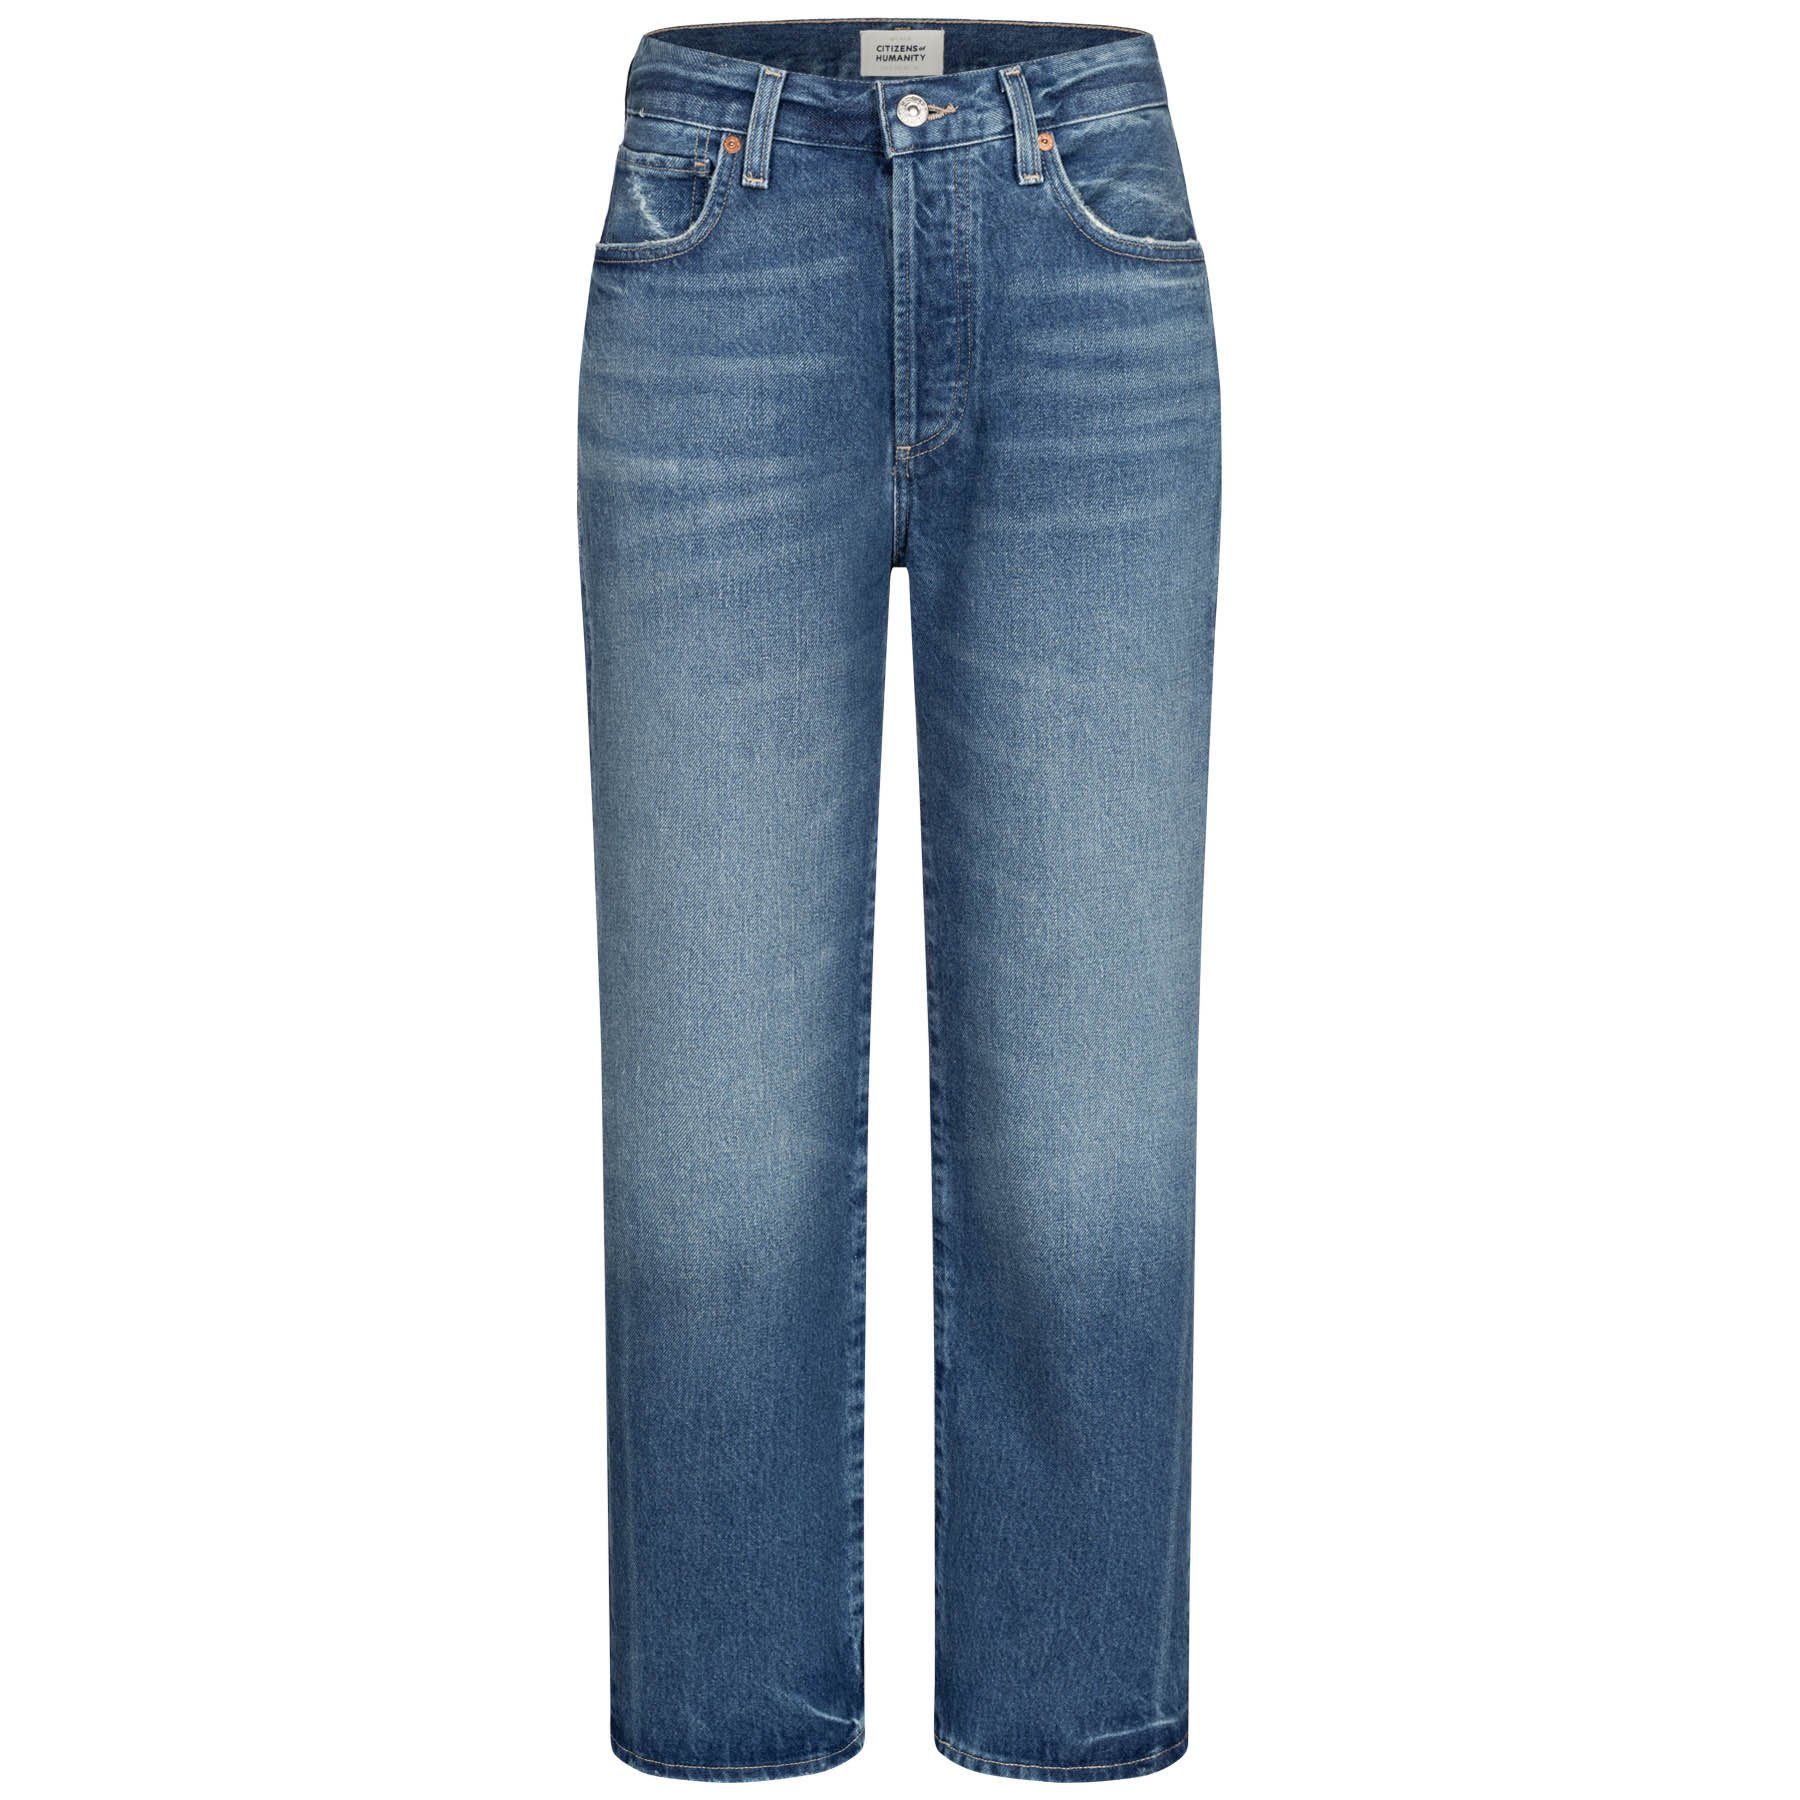 CITIZENS OF HUMANITY Straight-Jeans Jeans EMERY CROP aus Bio-Baumwolle